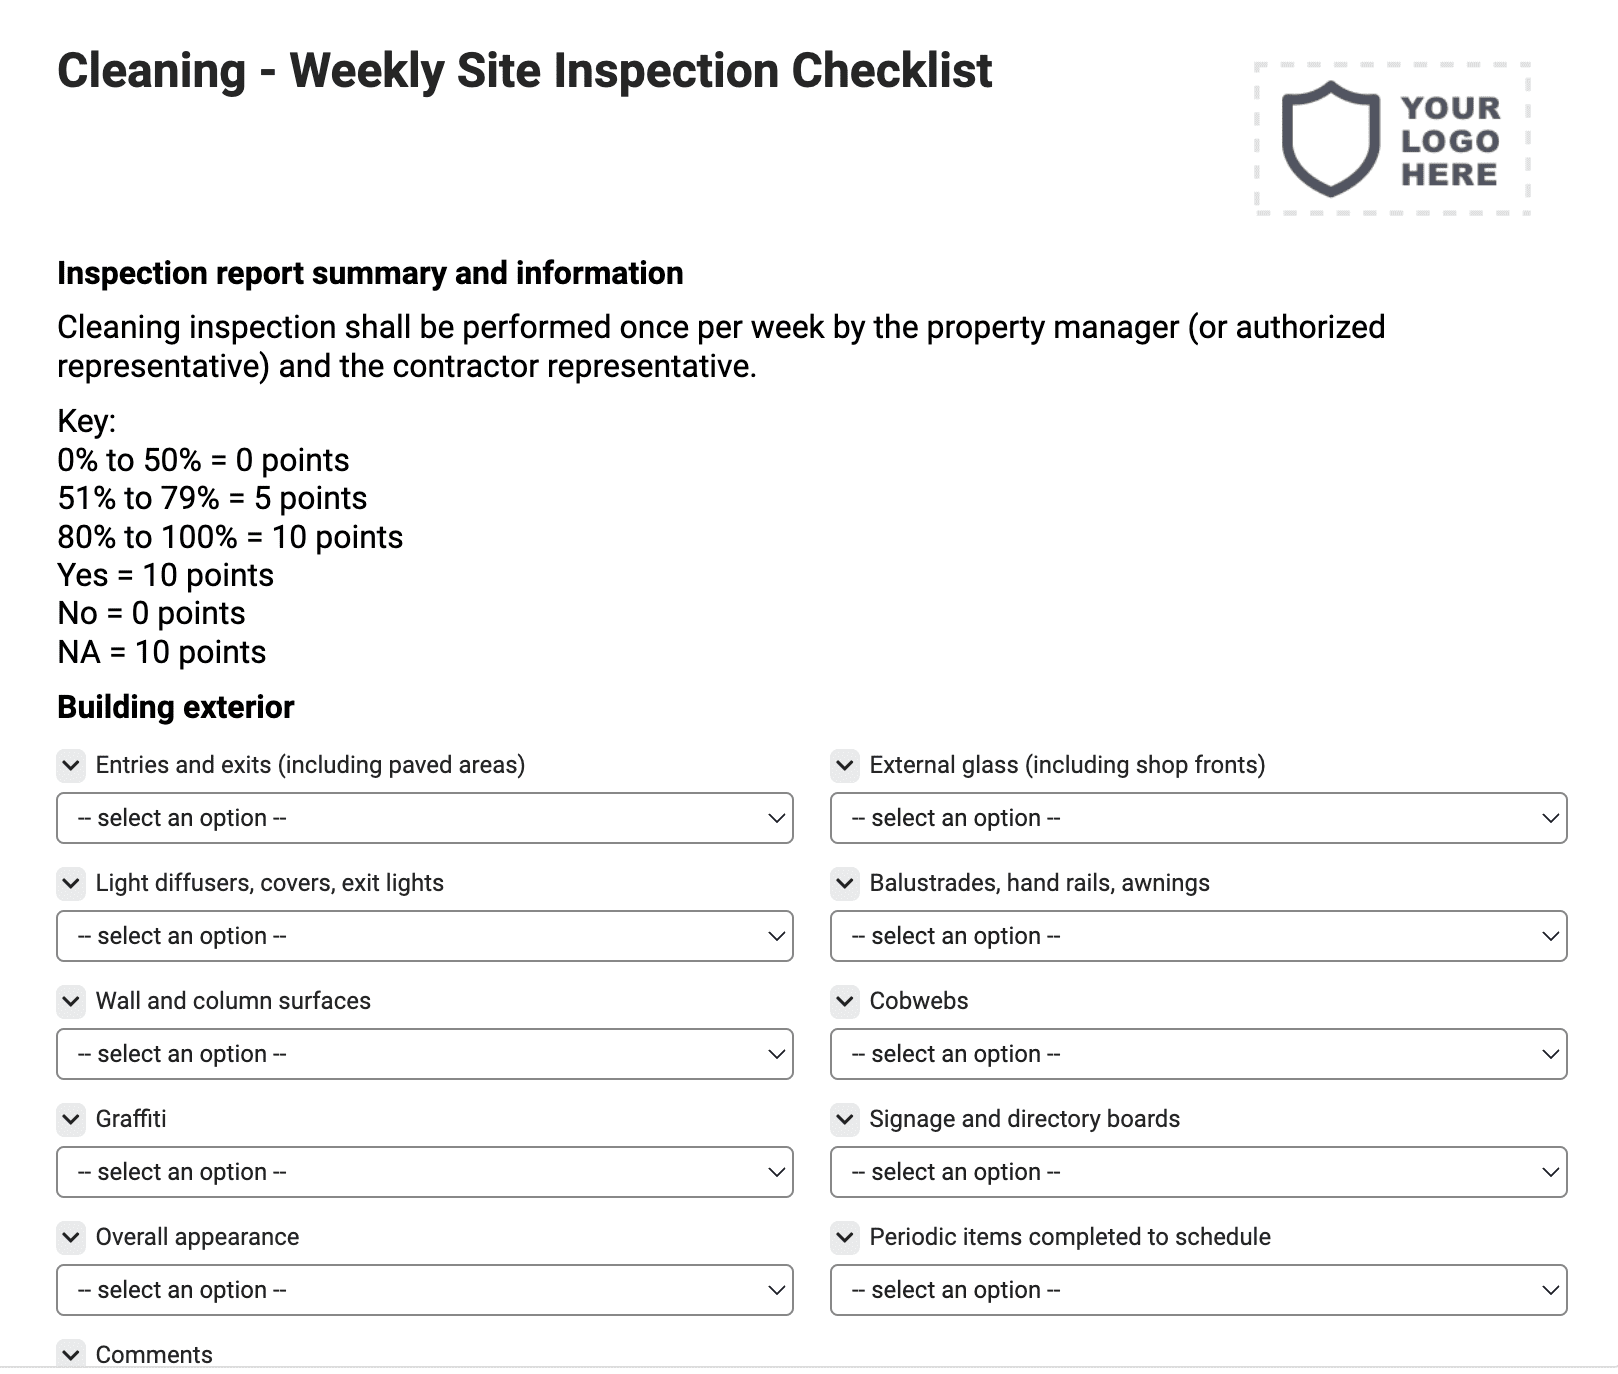 Cleaning - Weekly Site Inspection Checklist